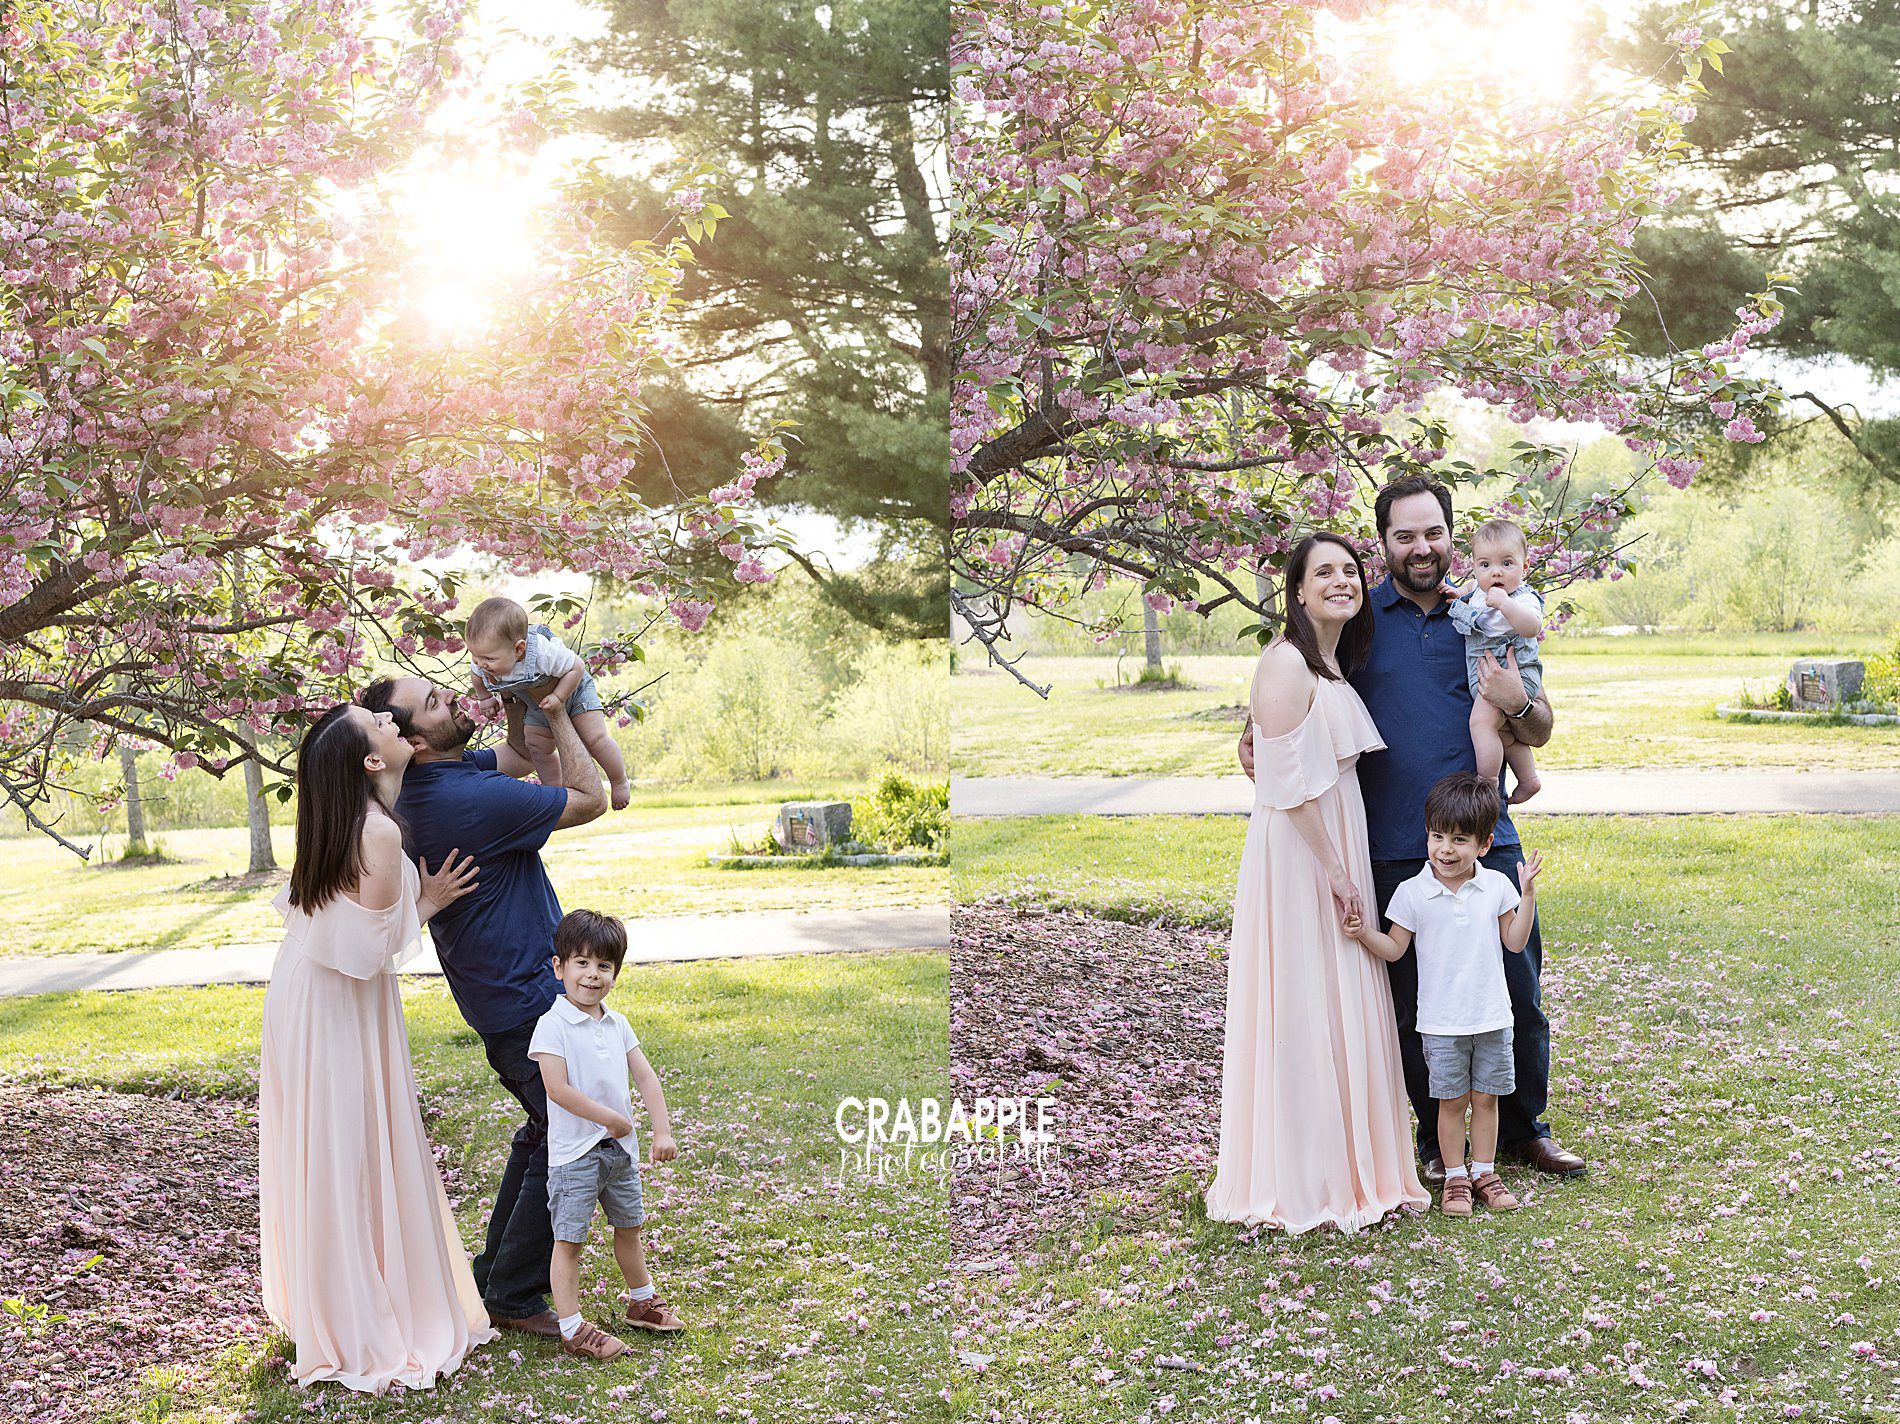 Family portraits outside during golden hour with blossoming springtime trees.